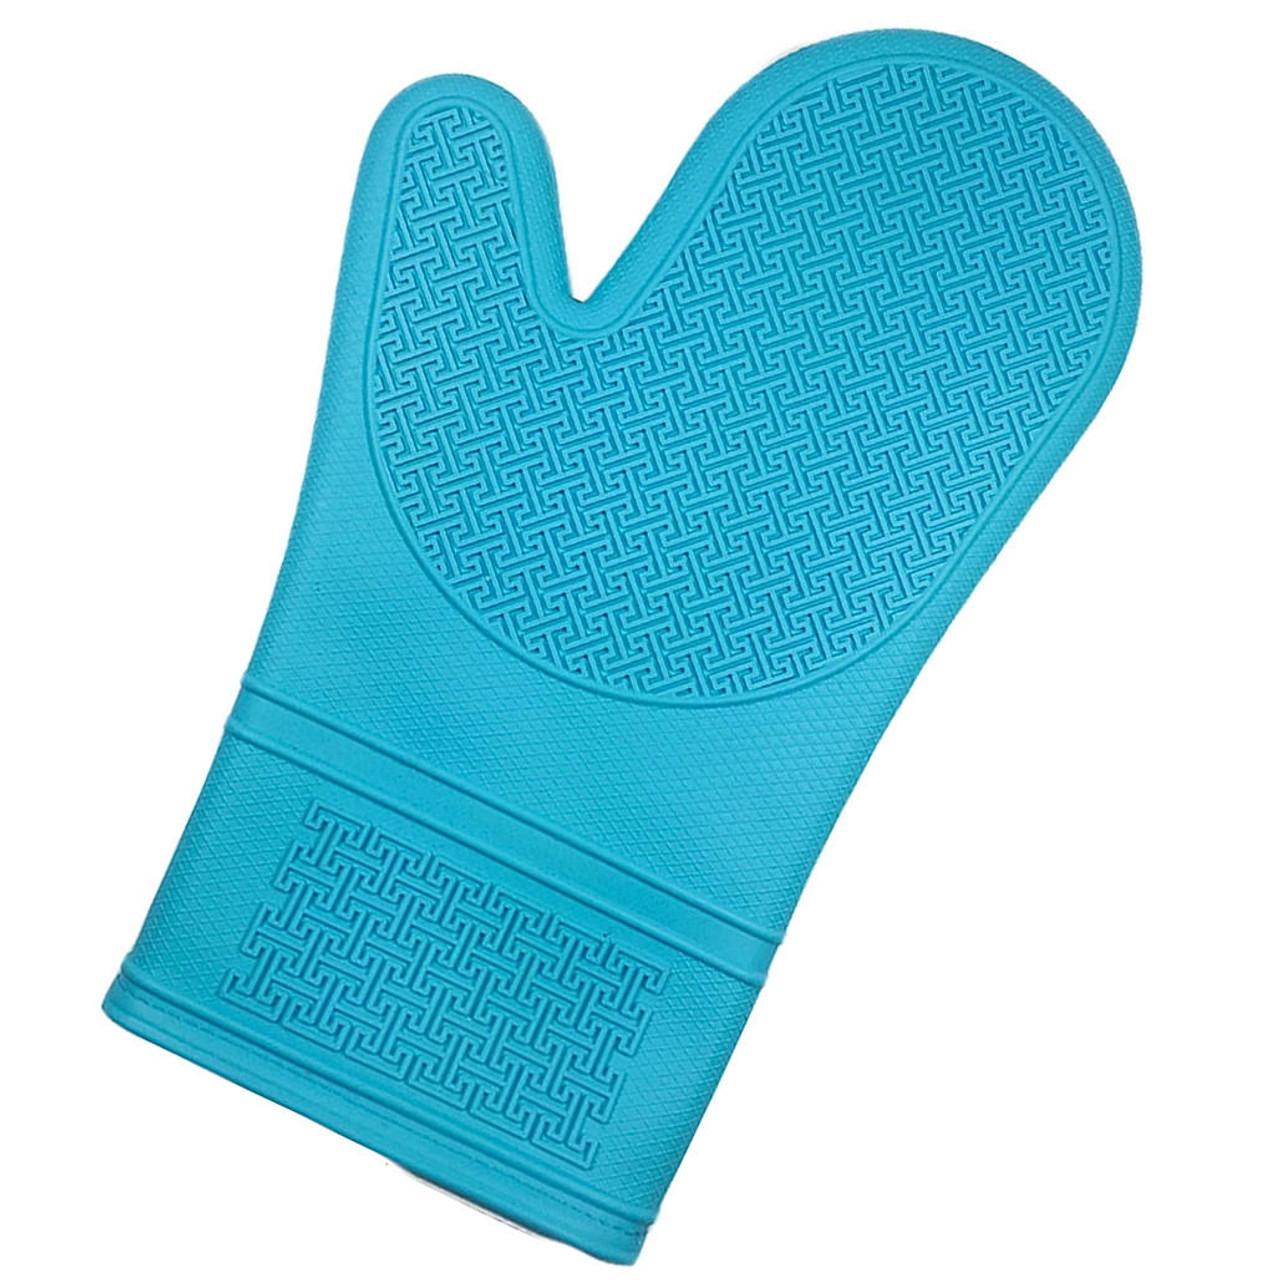 https://cdn11.bigcommerce.com/s-p82jn6co/images/stencil/1280x1280/products/18041/36870/11821-kitchen-basics-oven-mitt-silicone-azure-blue-12-in__37095.1687539115.jpg?c=2